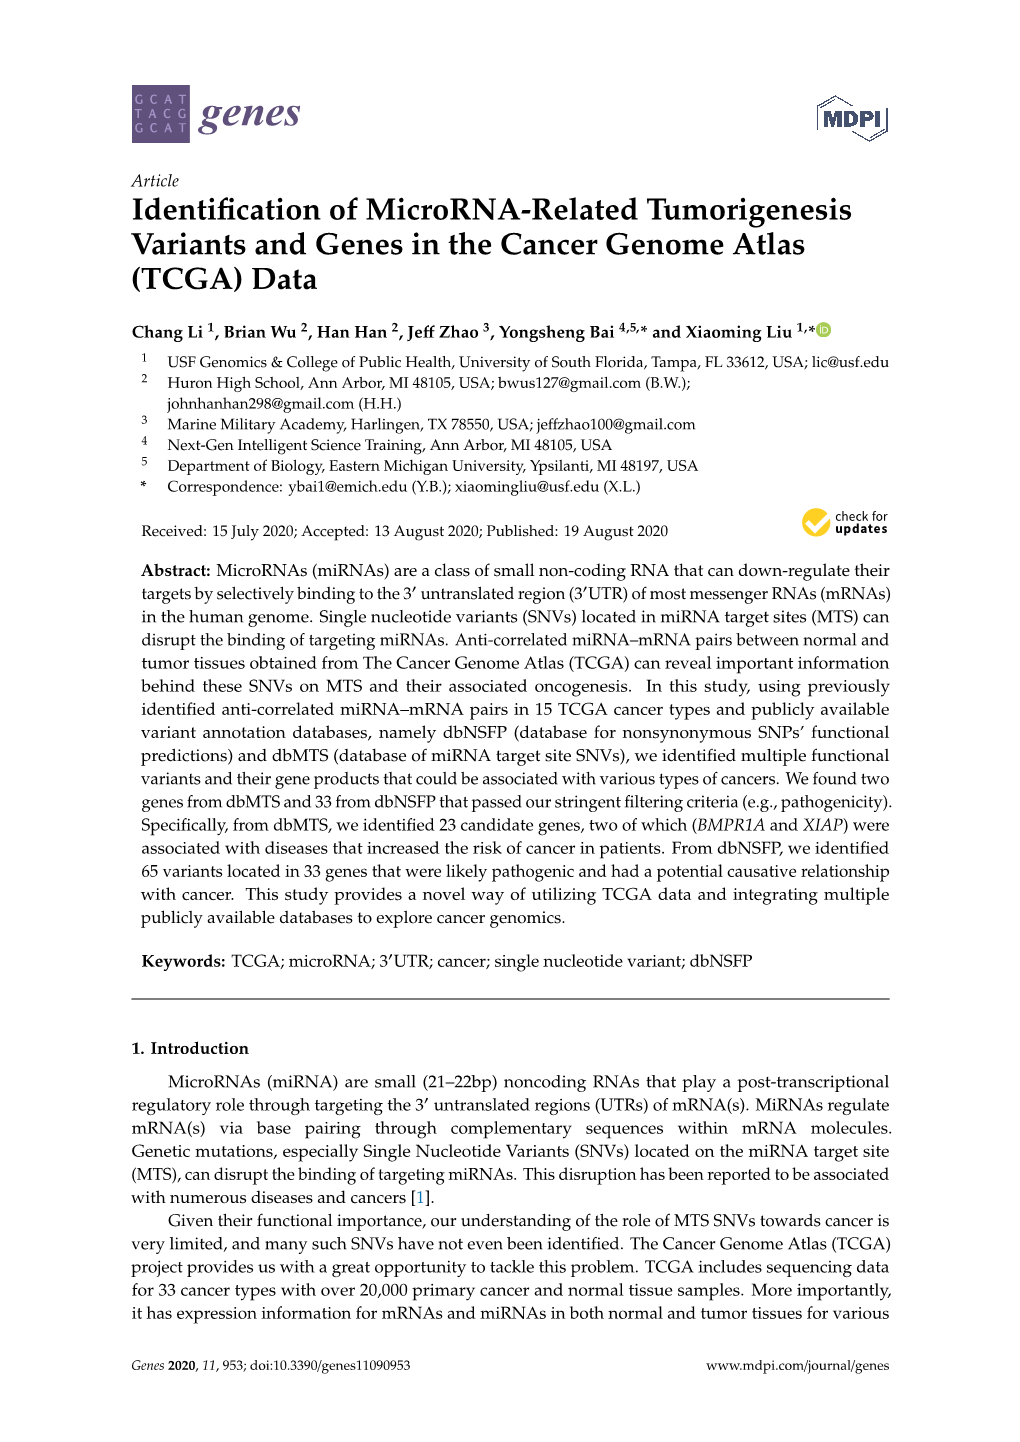 Identification of Microrna-Related Tumorigenesis Variants and Genes in the Cancer Genome Atlas (TCGA) Data